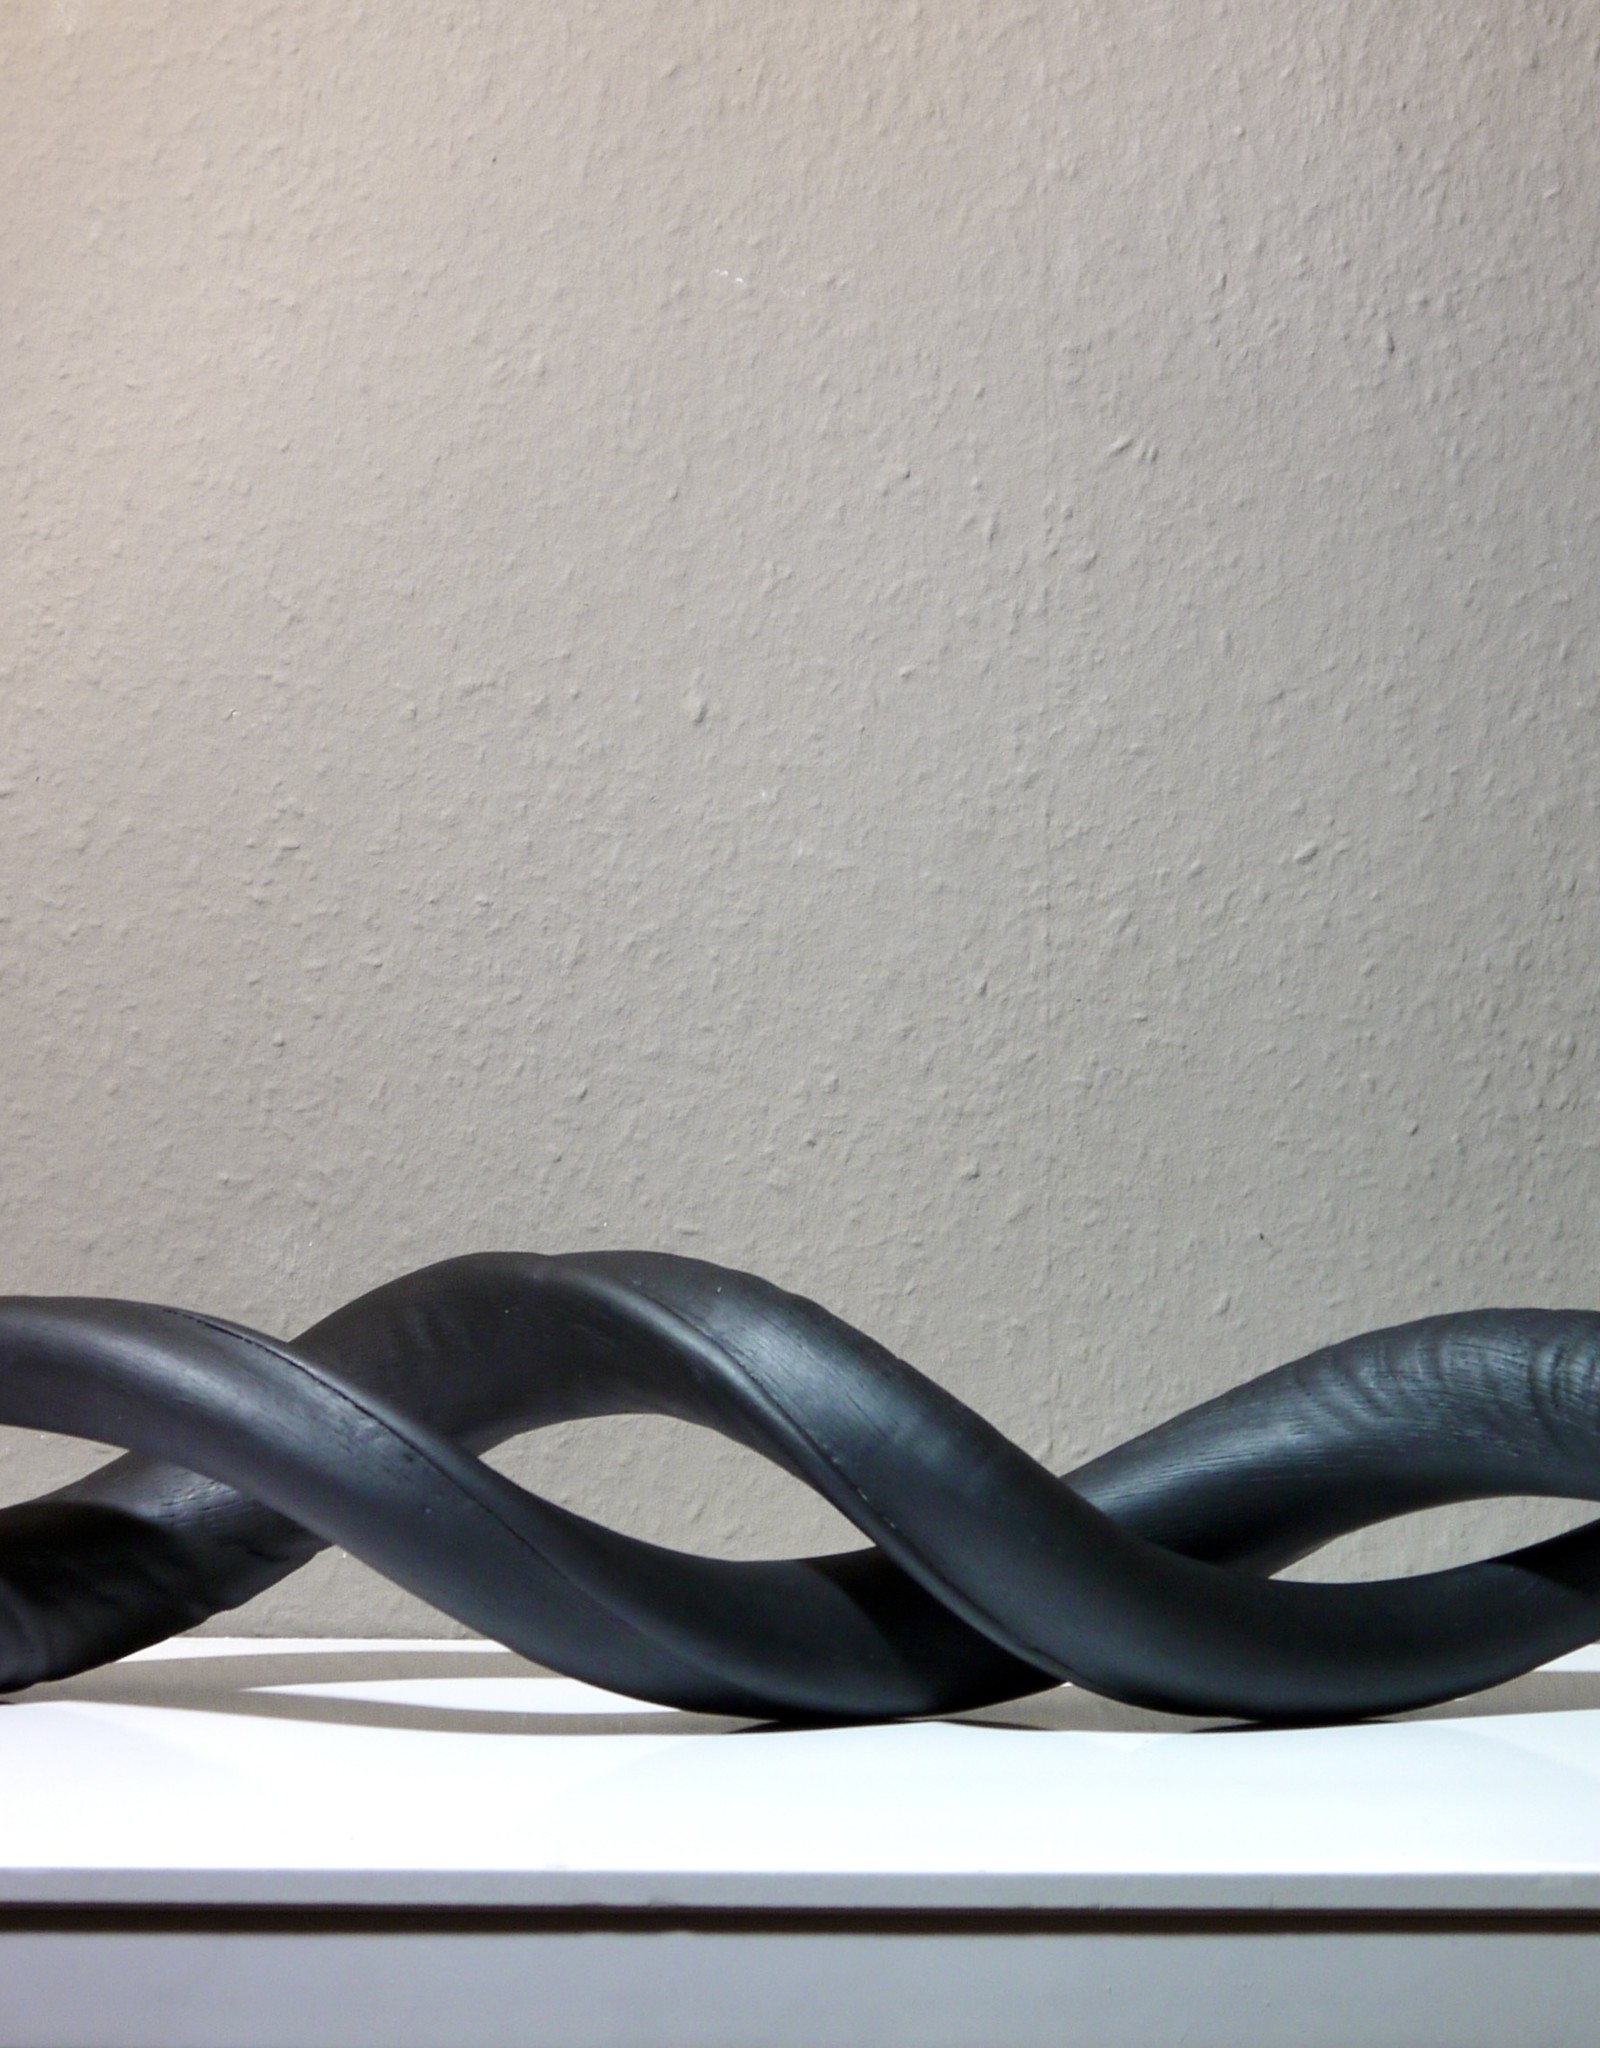 Kudo horn painted in a black matte